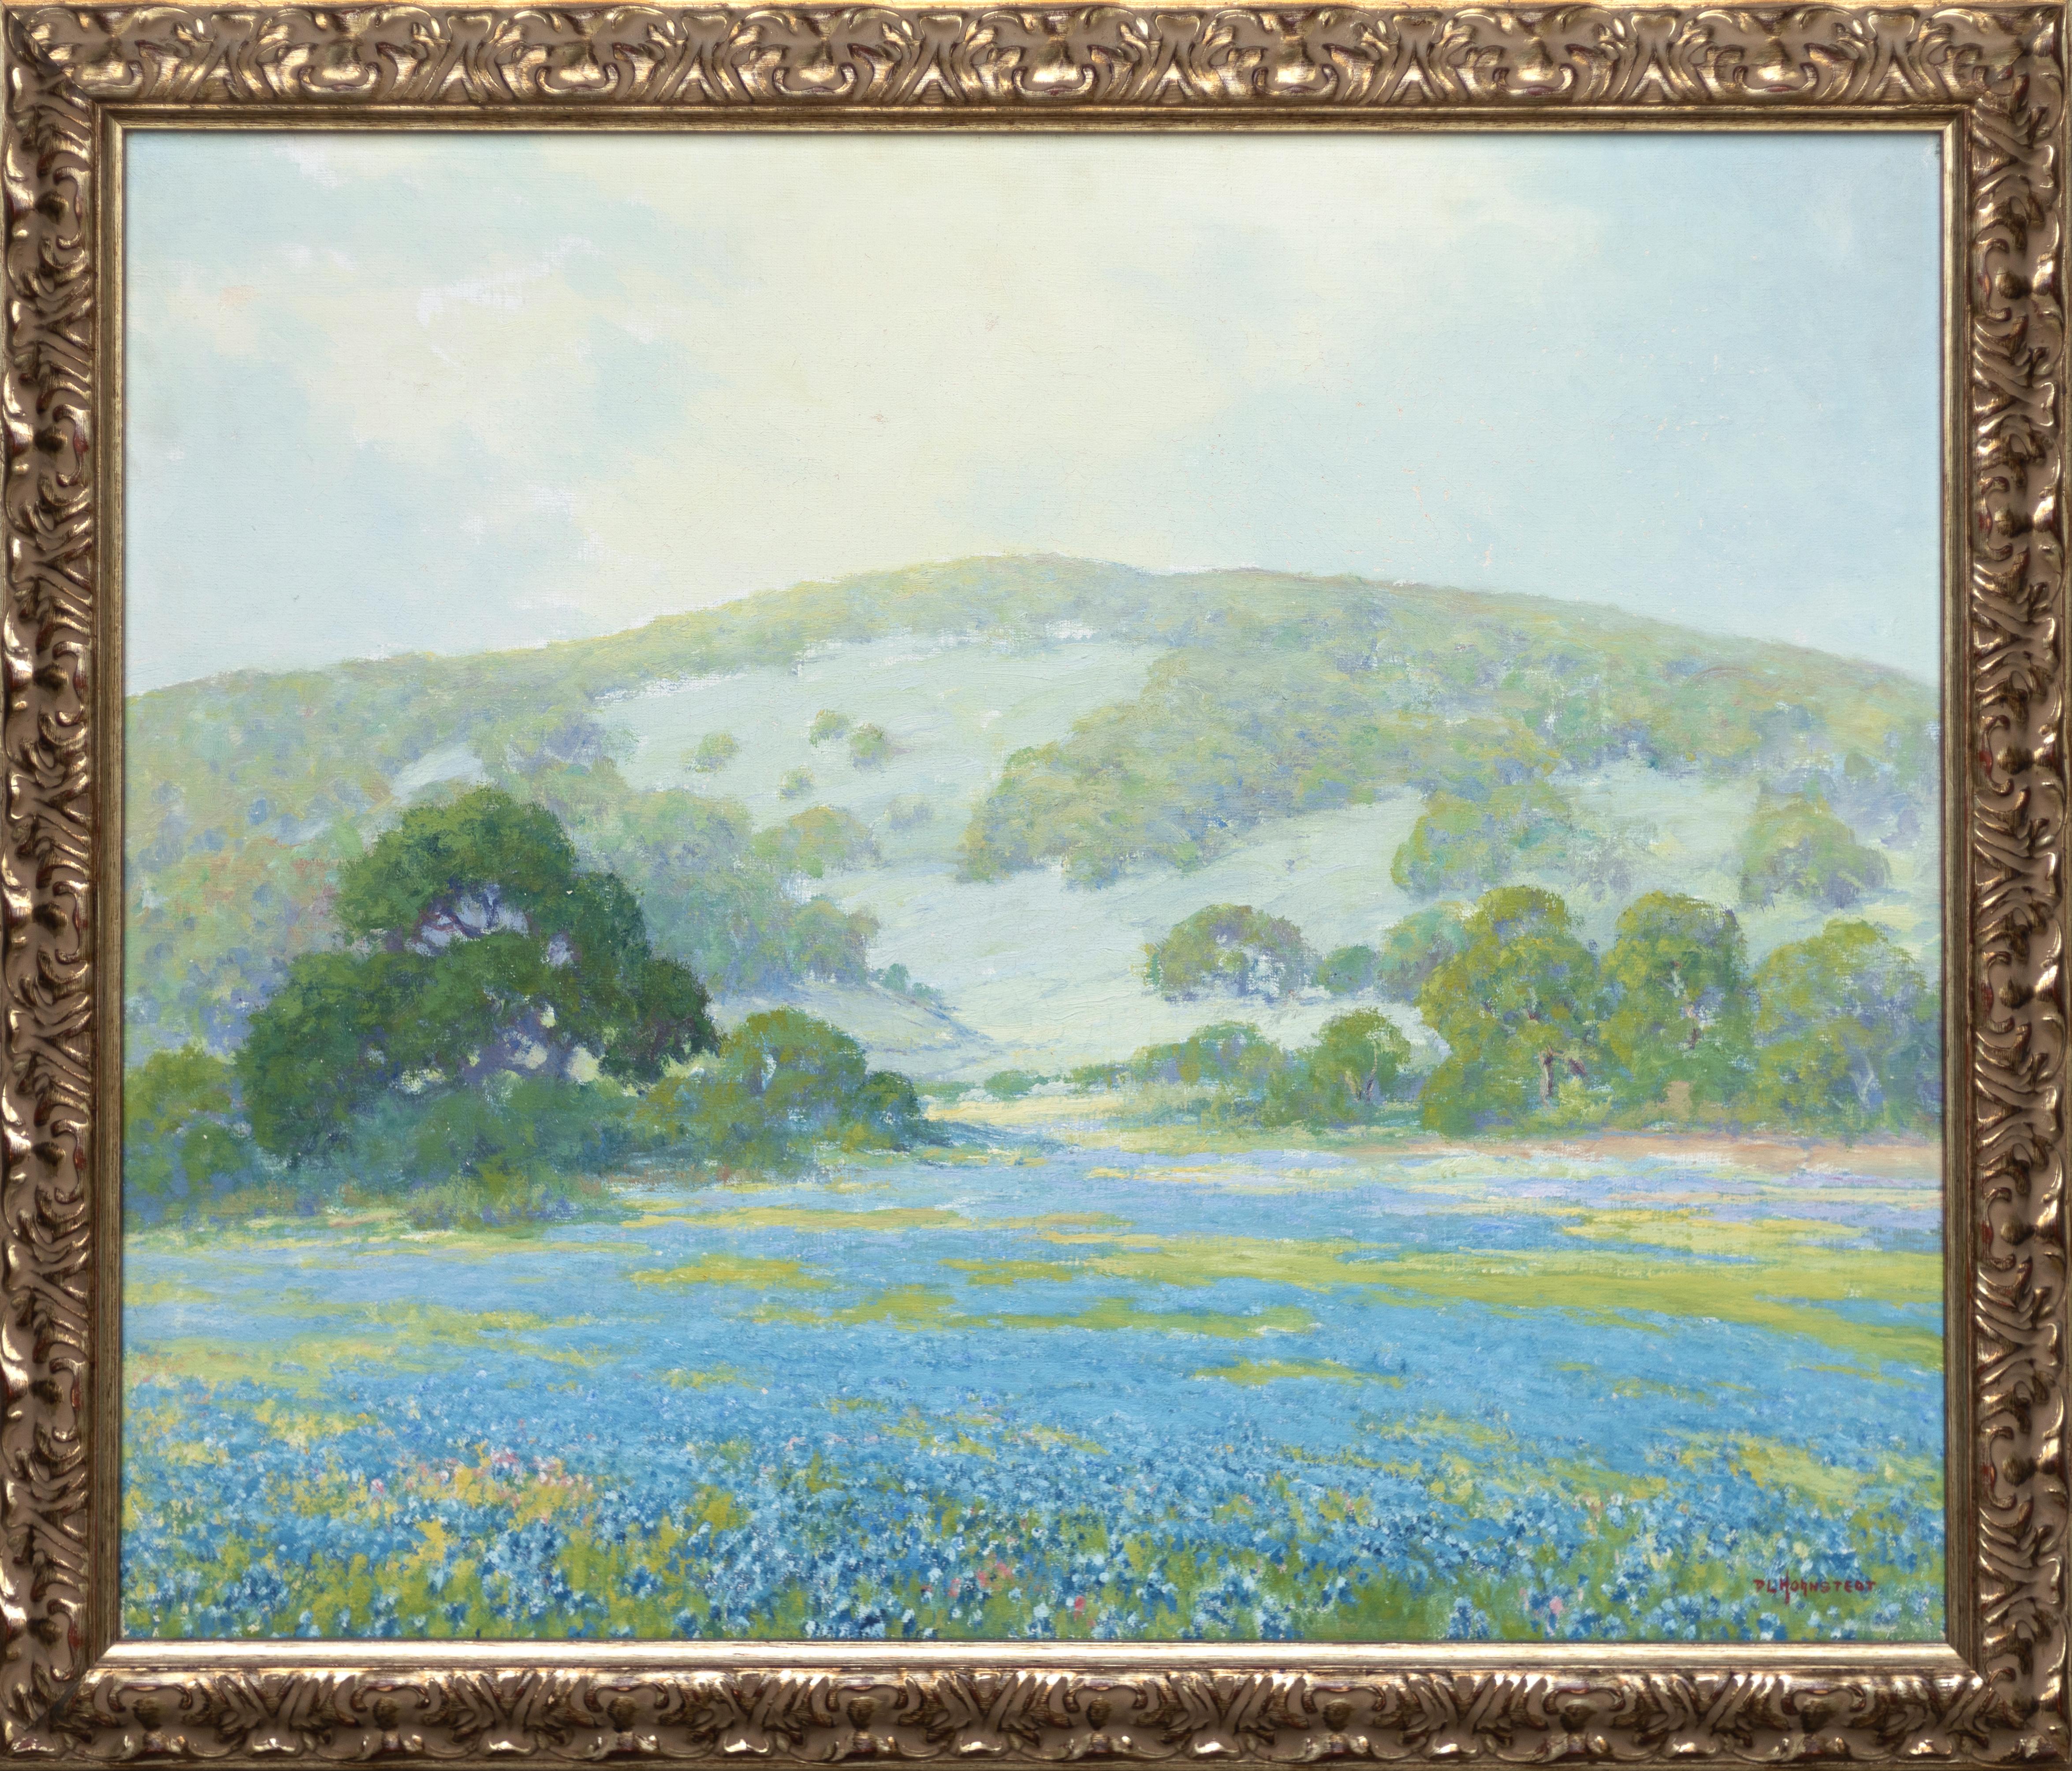 Texas Hill Country Landscape with Field of Bluebonnets - Painting by Peter L. Hohnstedt